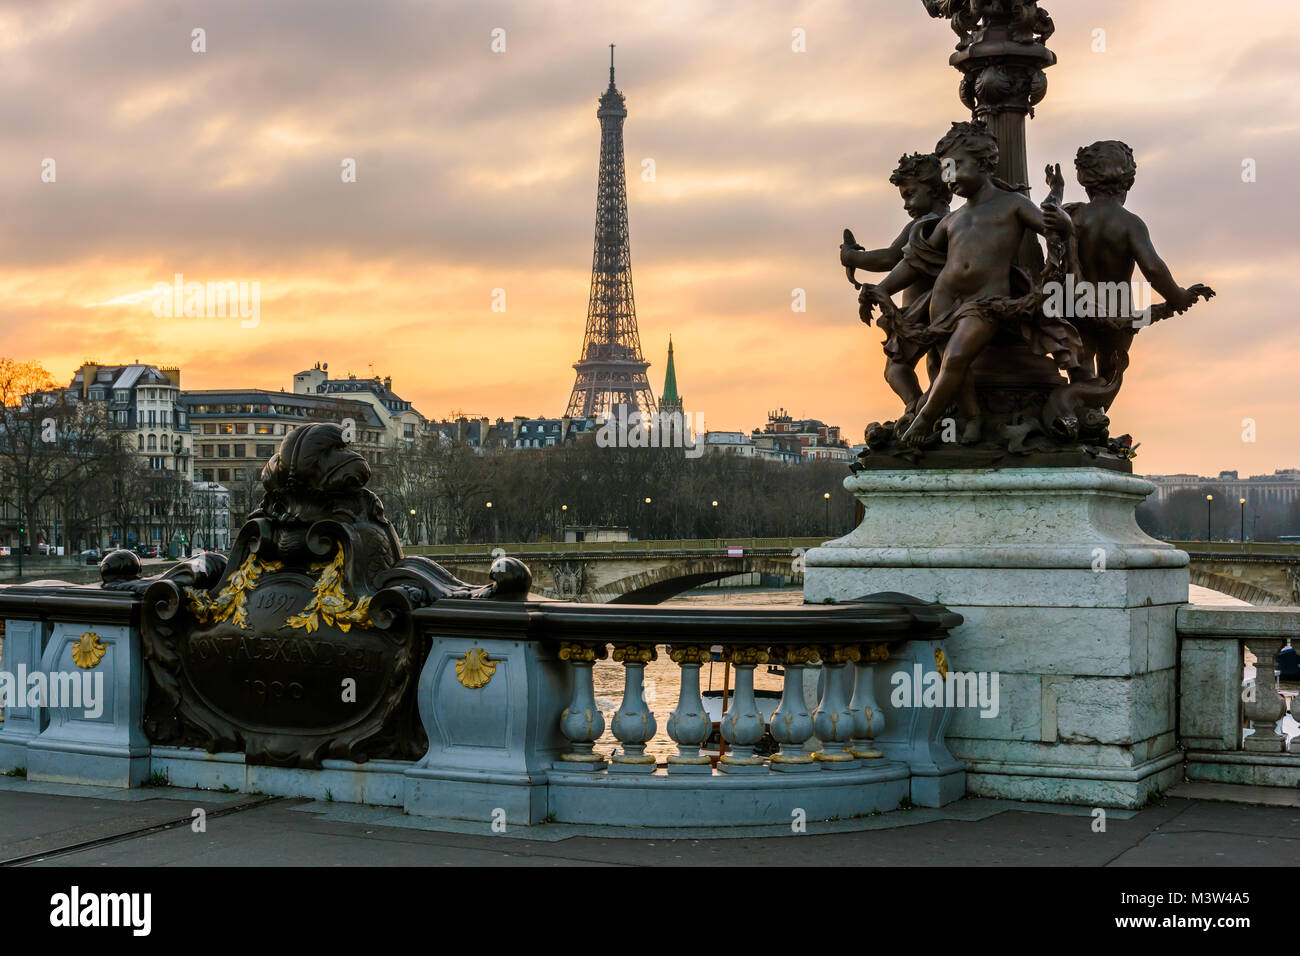 View of the Eiffel tower from the Pont Alexandre III at sunset with the cherubs ornamenting one of its Art Nouveau street lamp in the foreground. Stock Photo